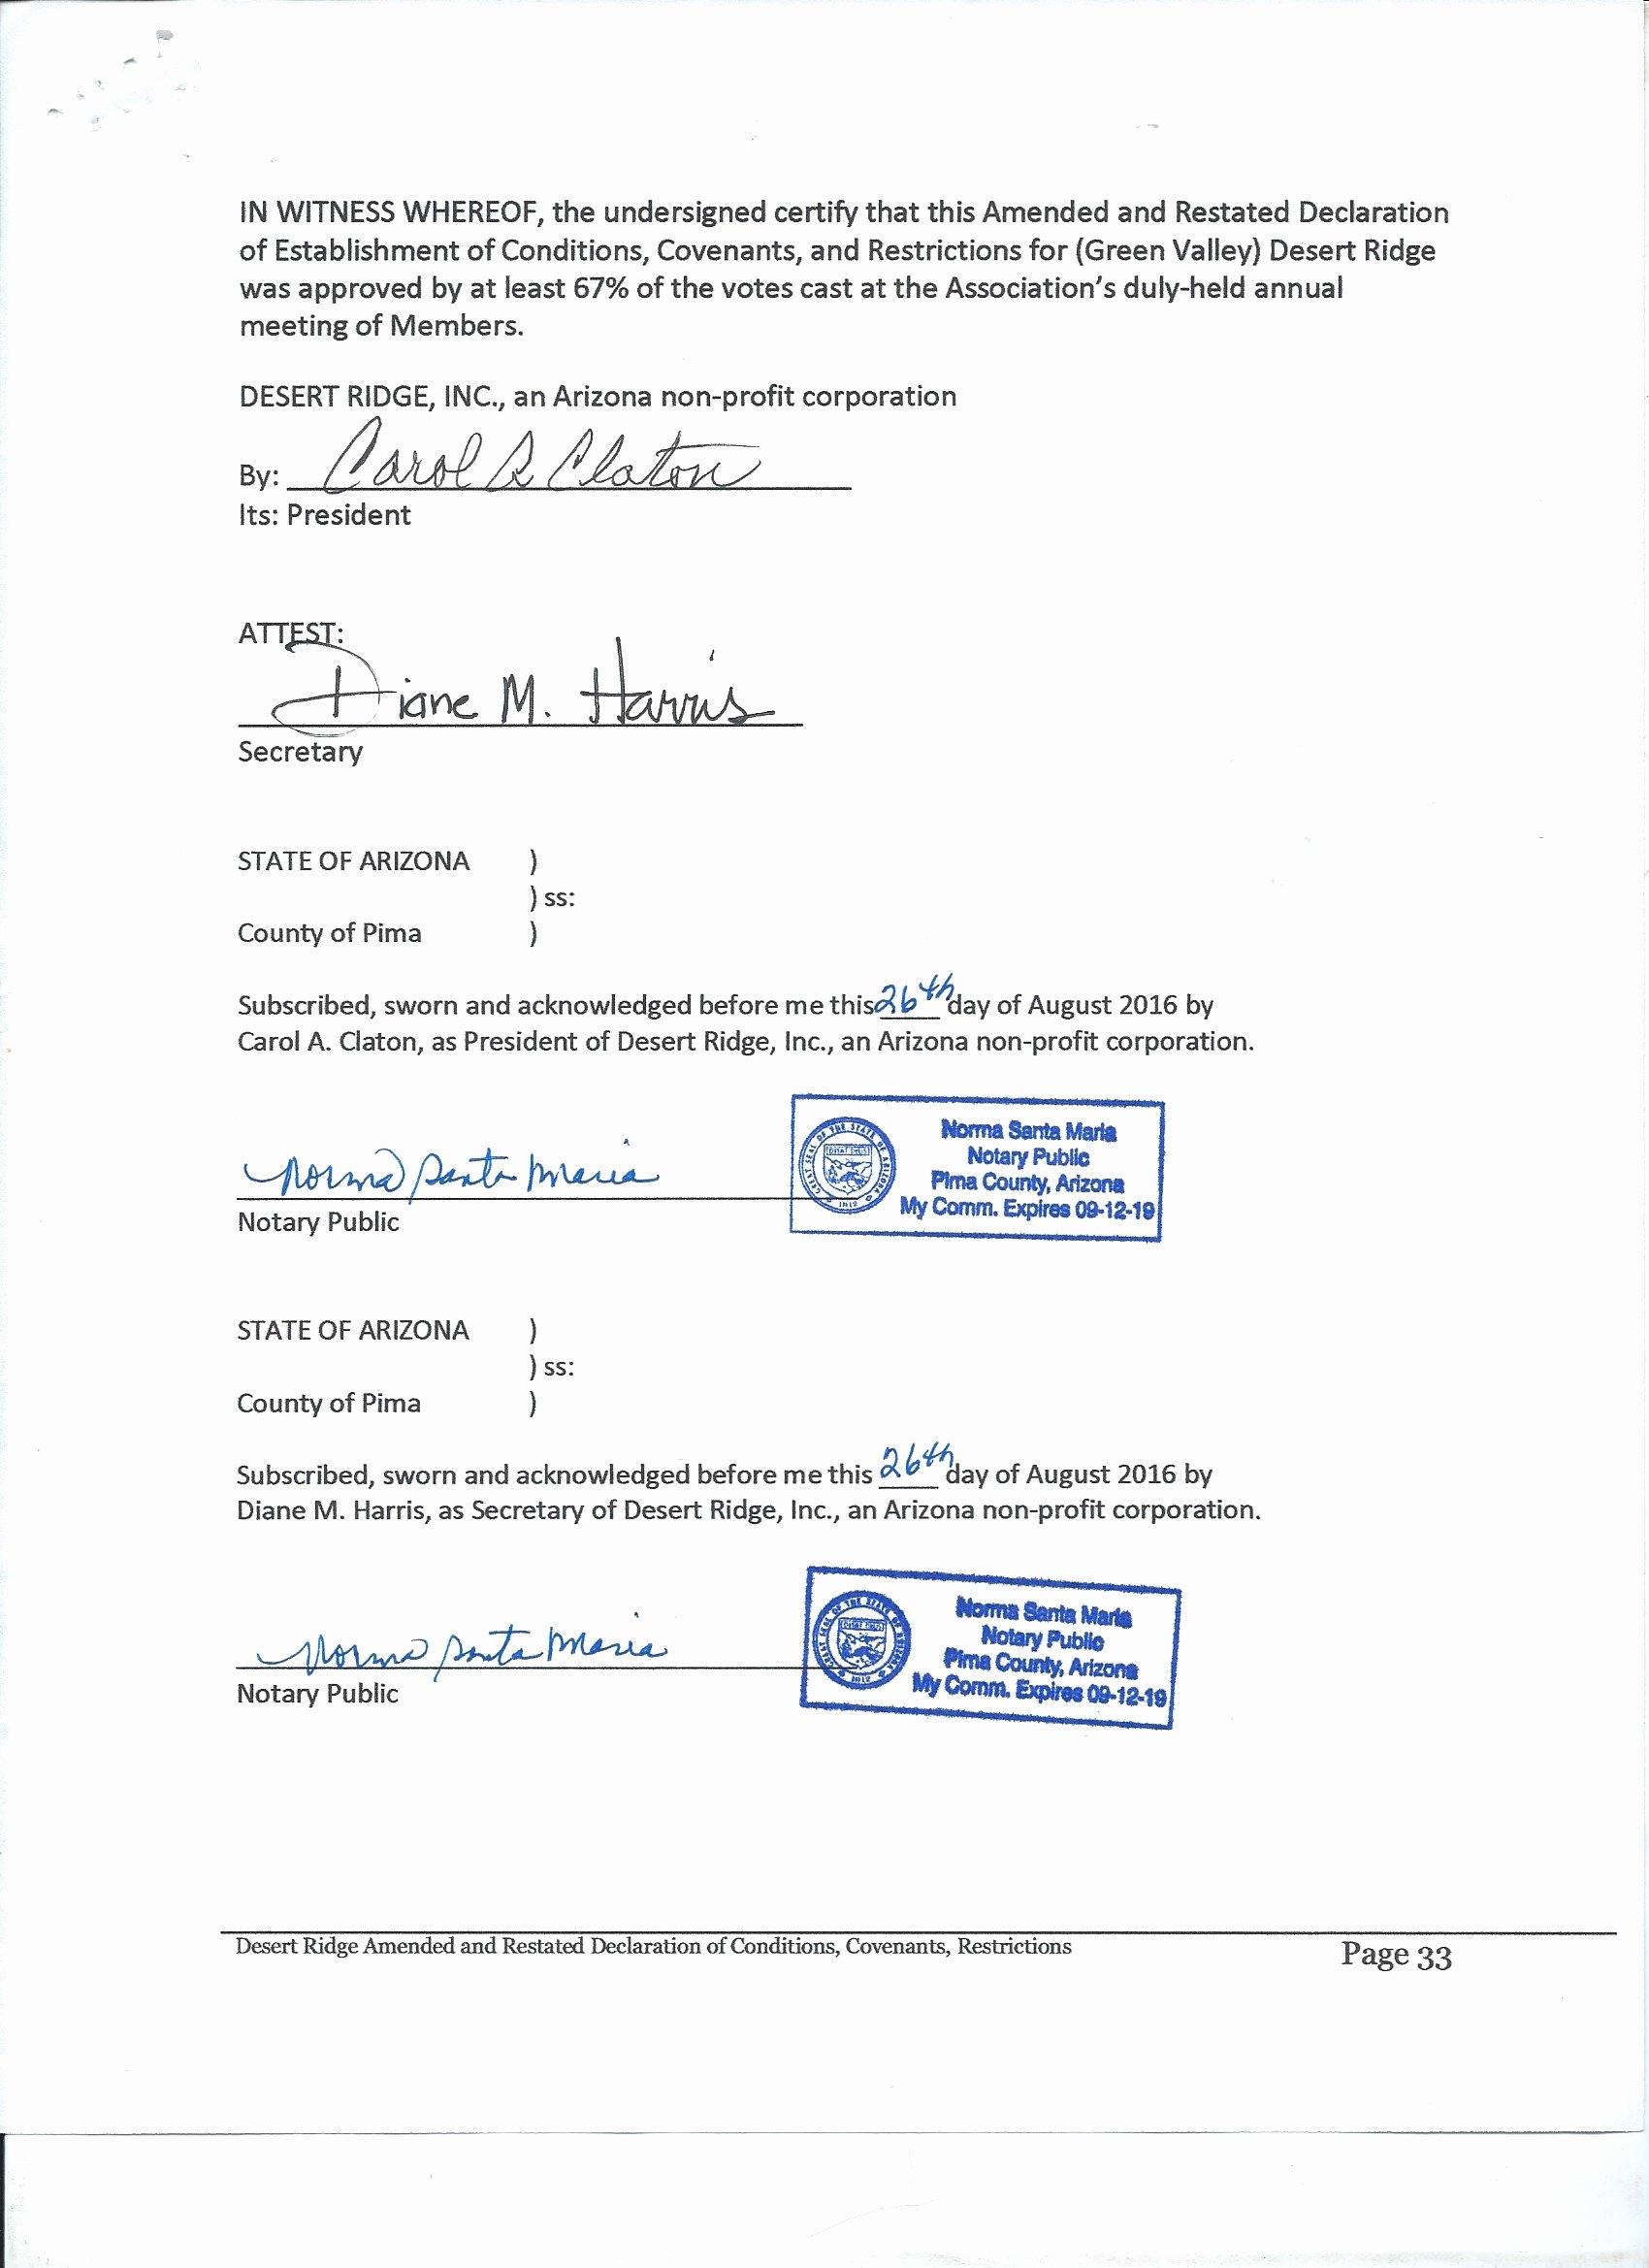 Contract Signature Page Example Beautiful Cc&amp;rs Rules bylaws Legal Agreements Desert Ridge Hoa